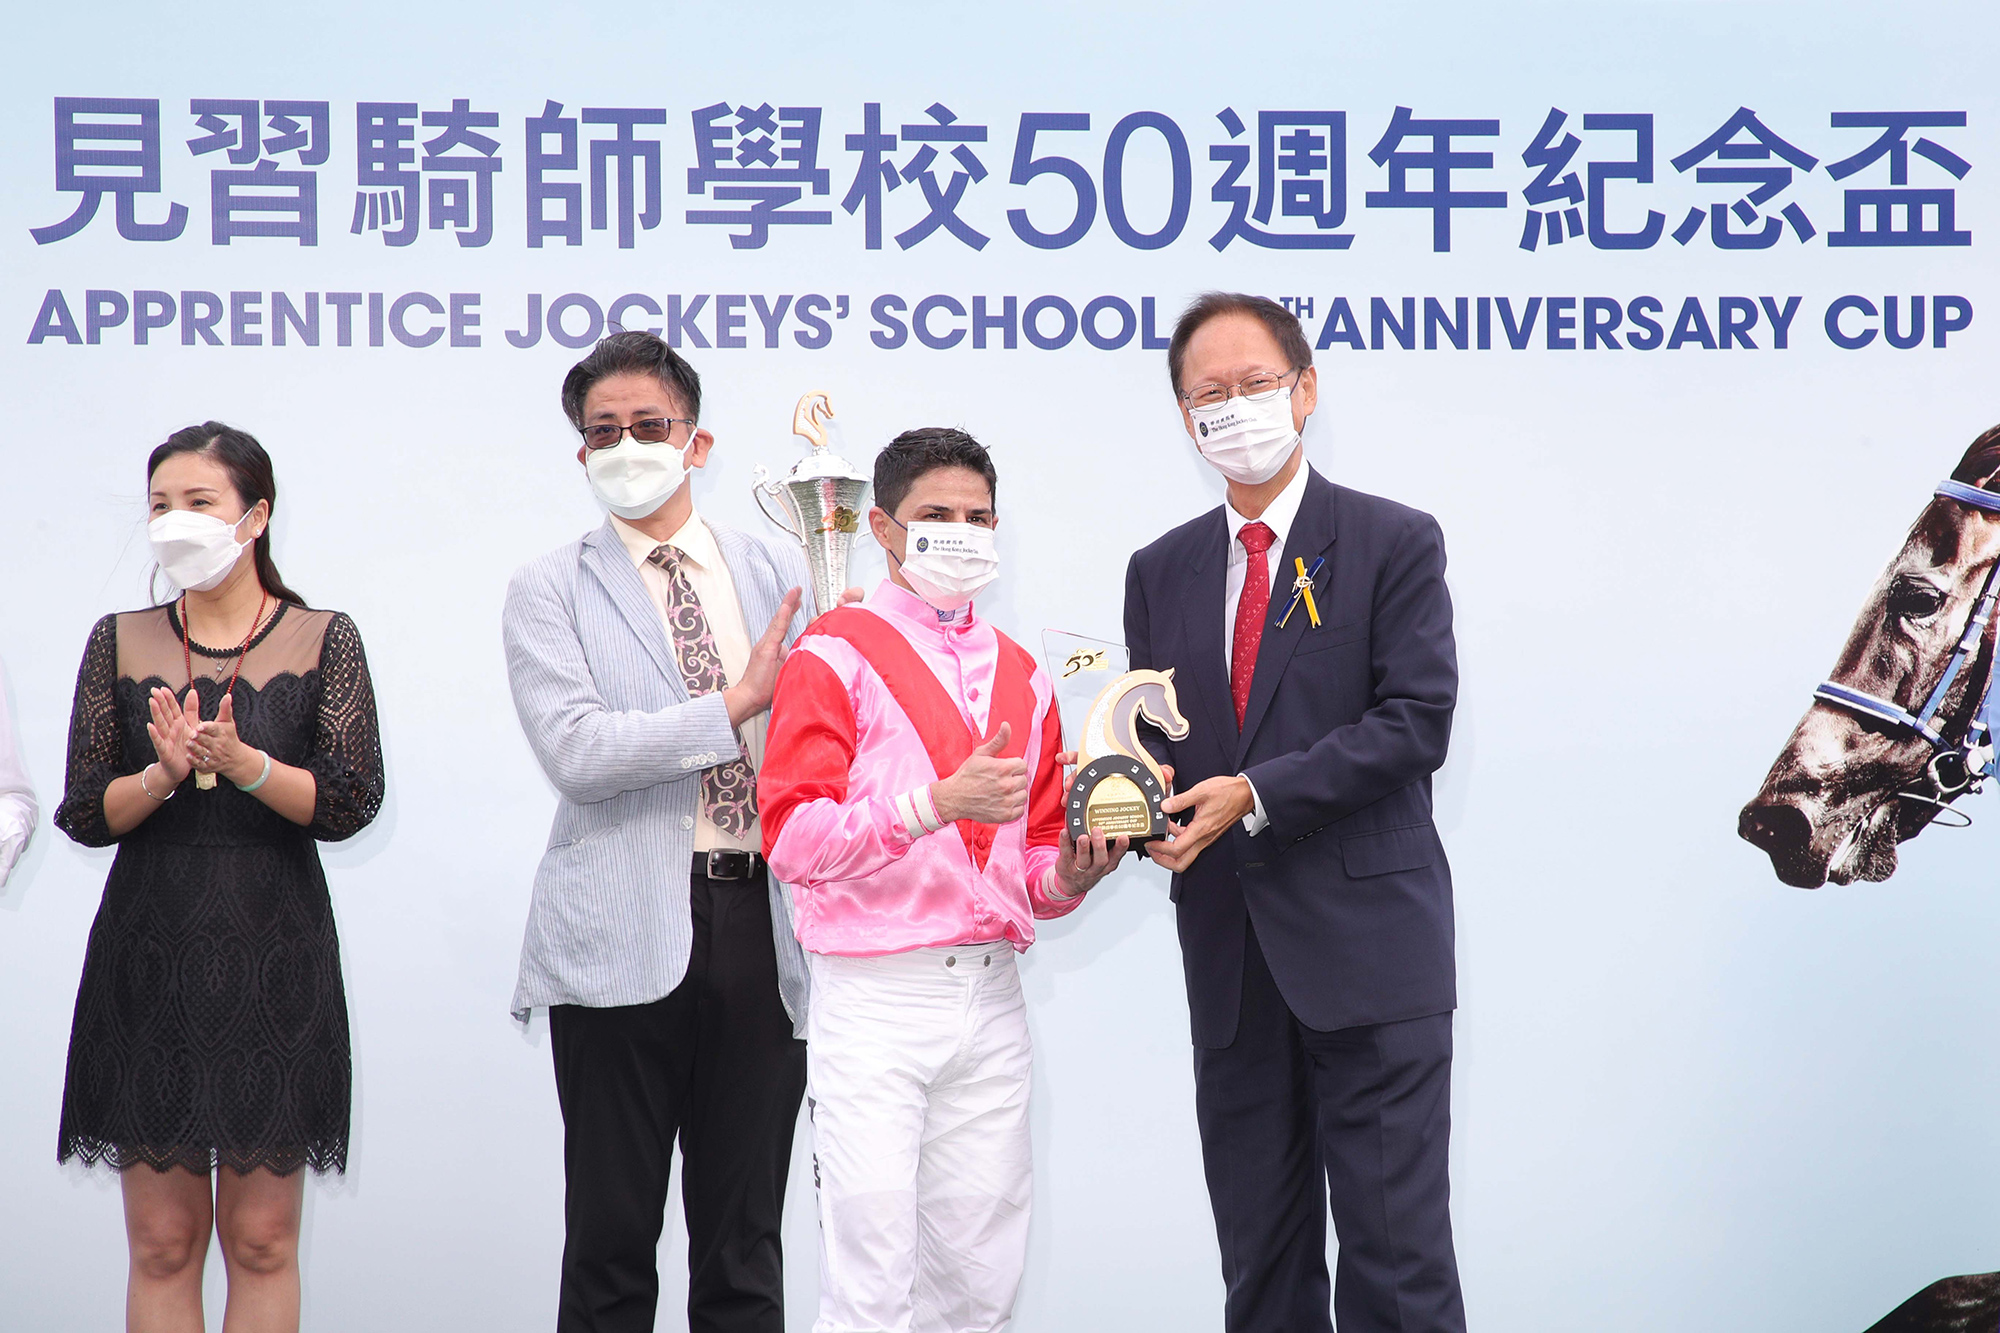 Chairman of The Hong Kong Jockey Club Mr Philip Chen presents the Apprentice Jockeys’ School 50th Anniversary Cup and trophies to Ace One’s owner representatives, trainer Douglas Whyte and jockey Ruan Maia.